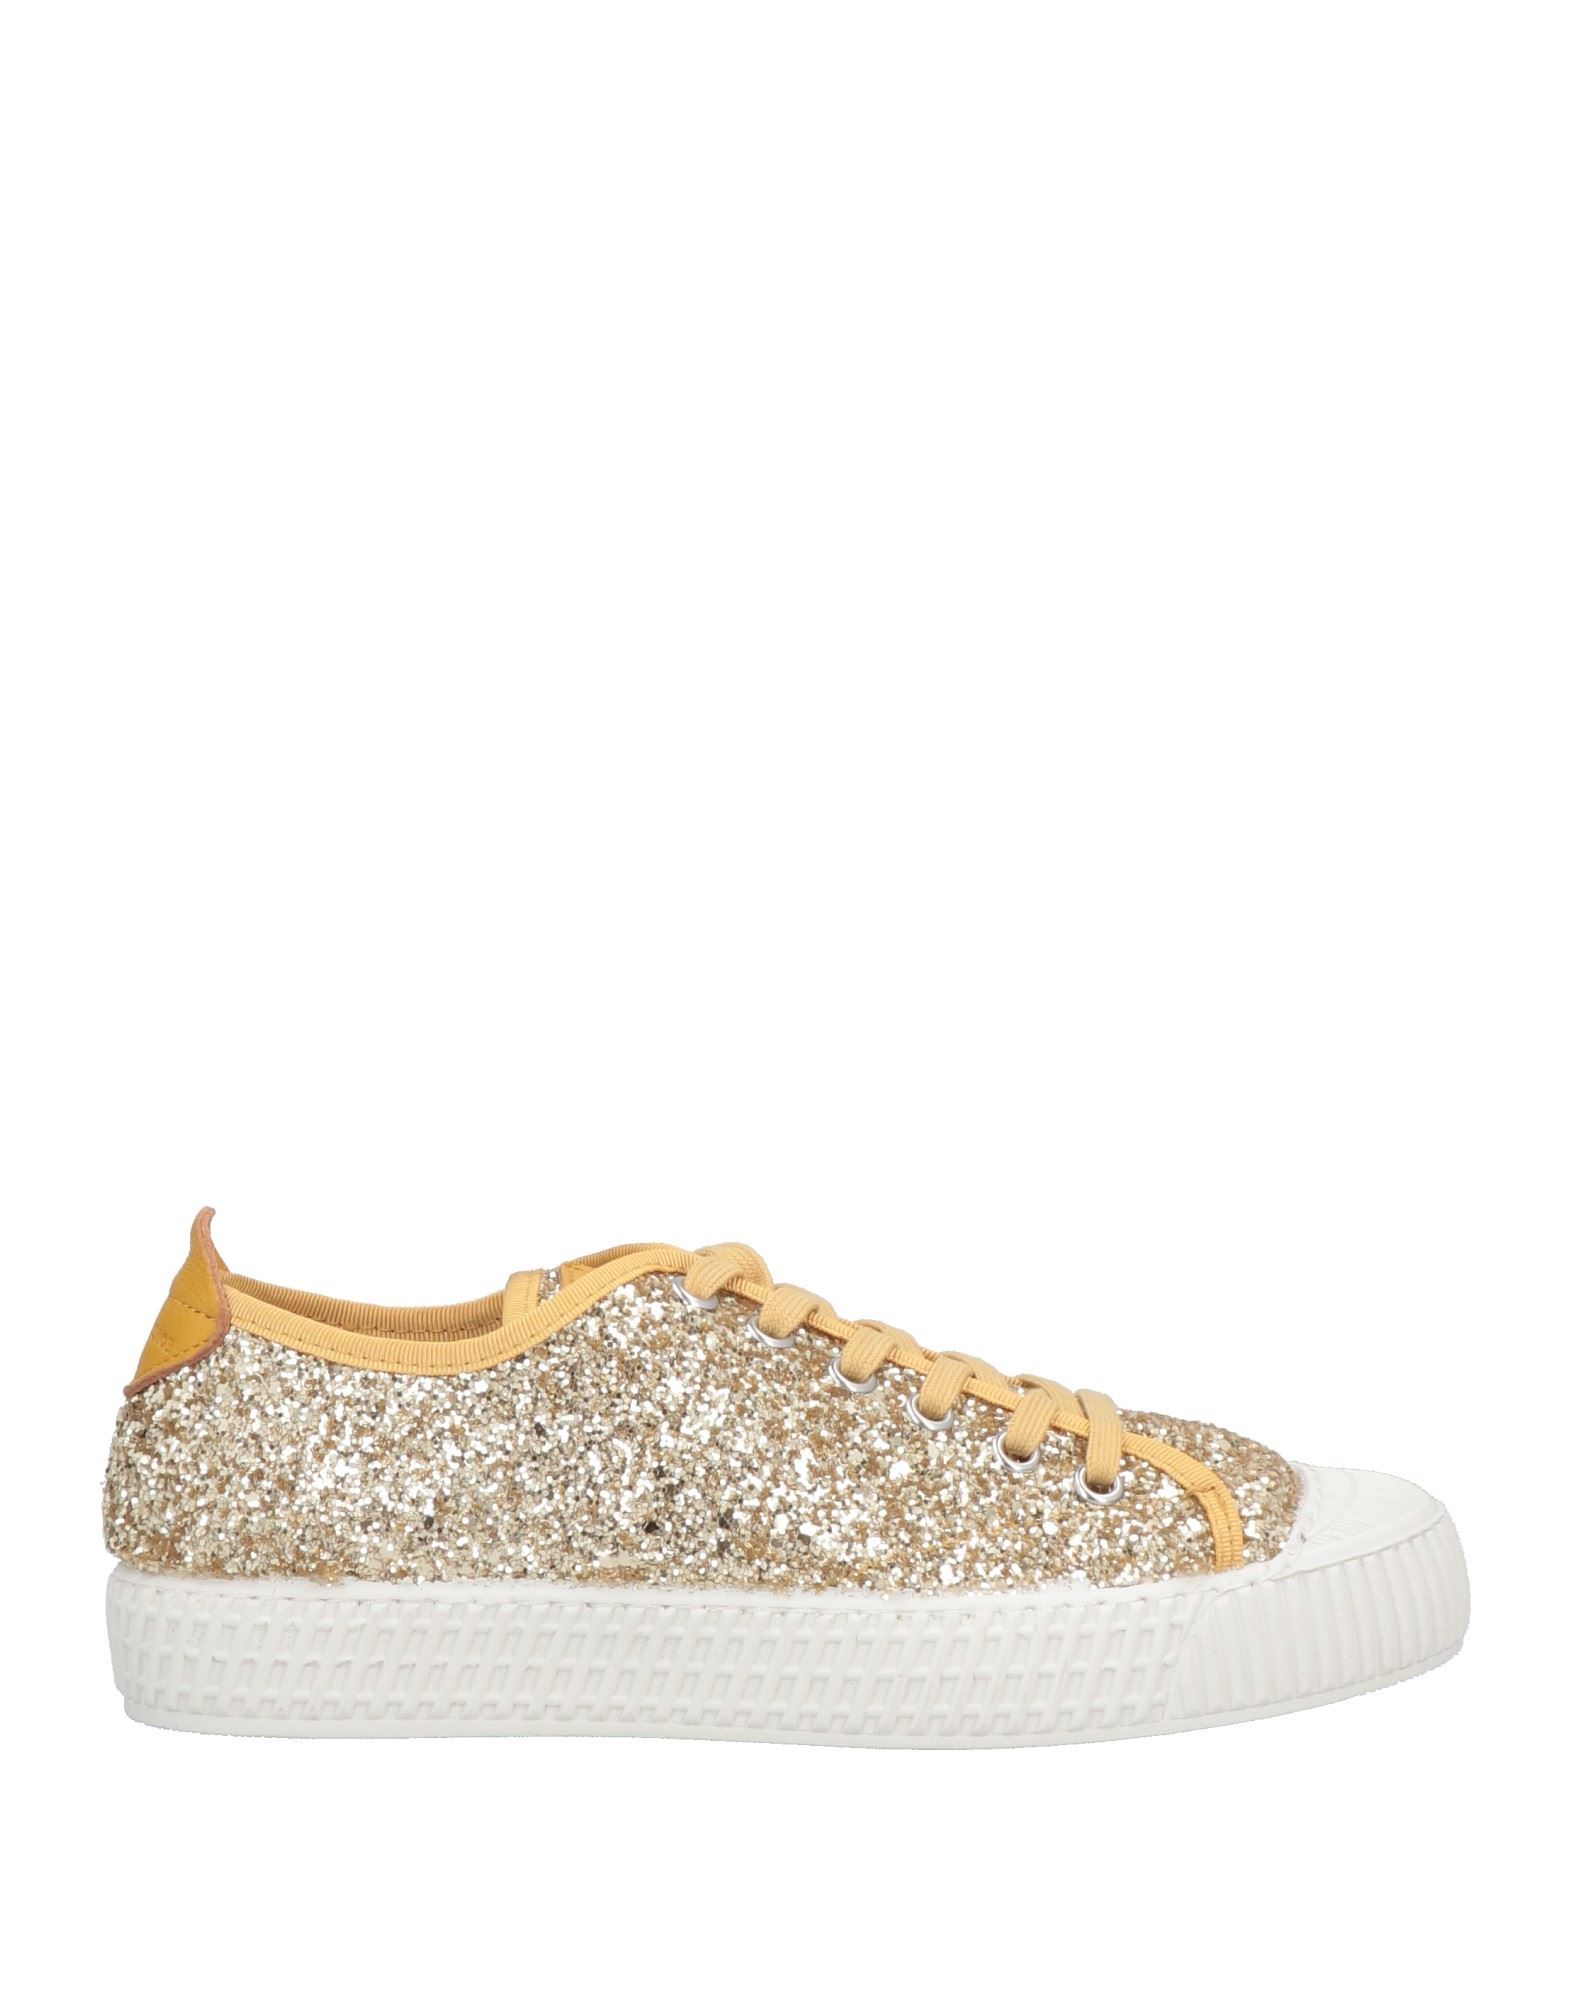 Carshoe Sneakers In Gold